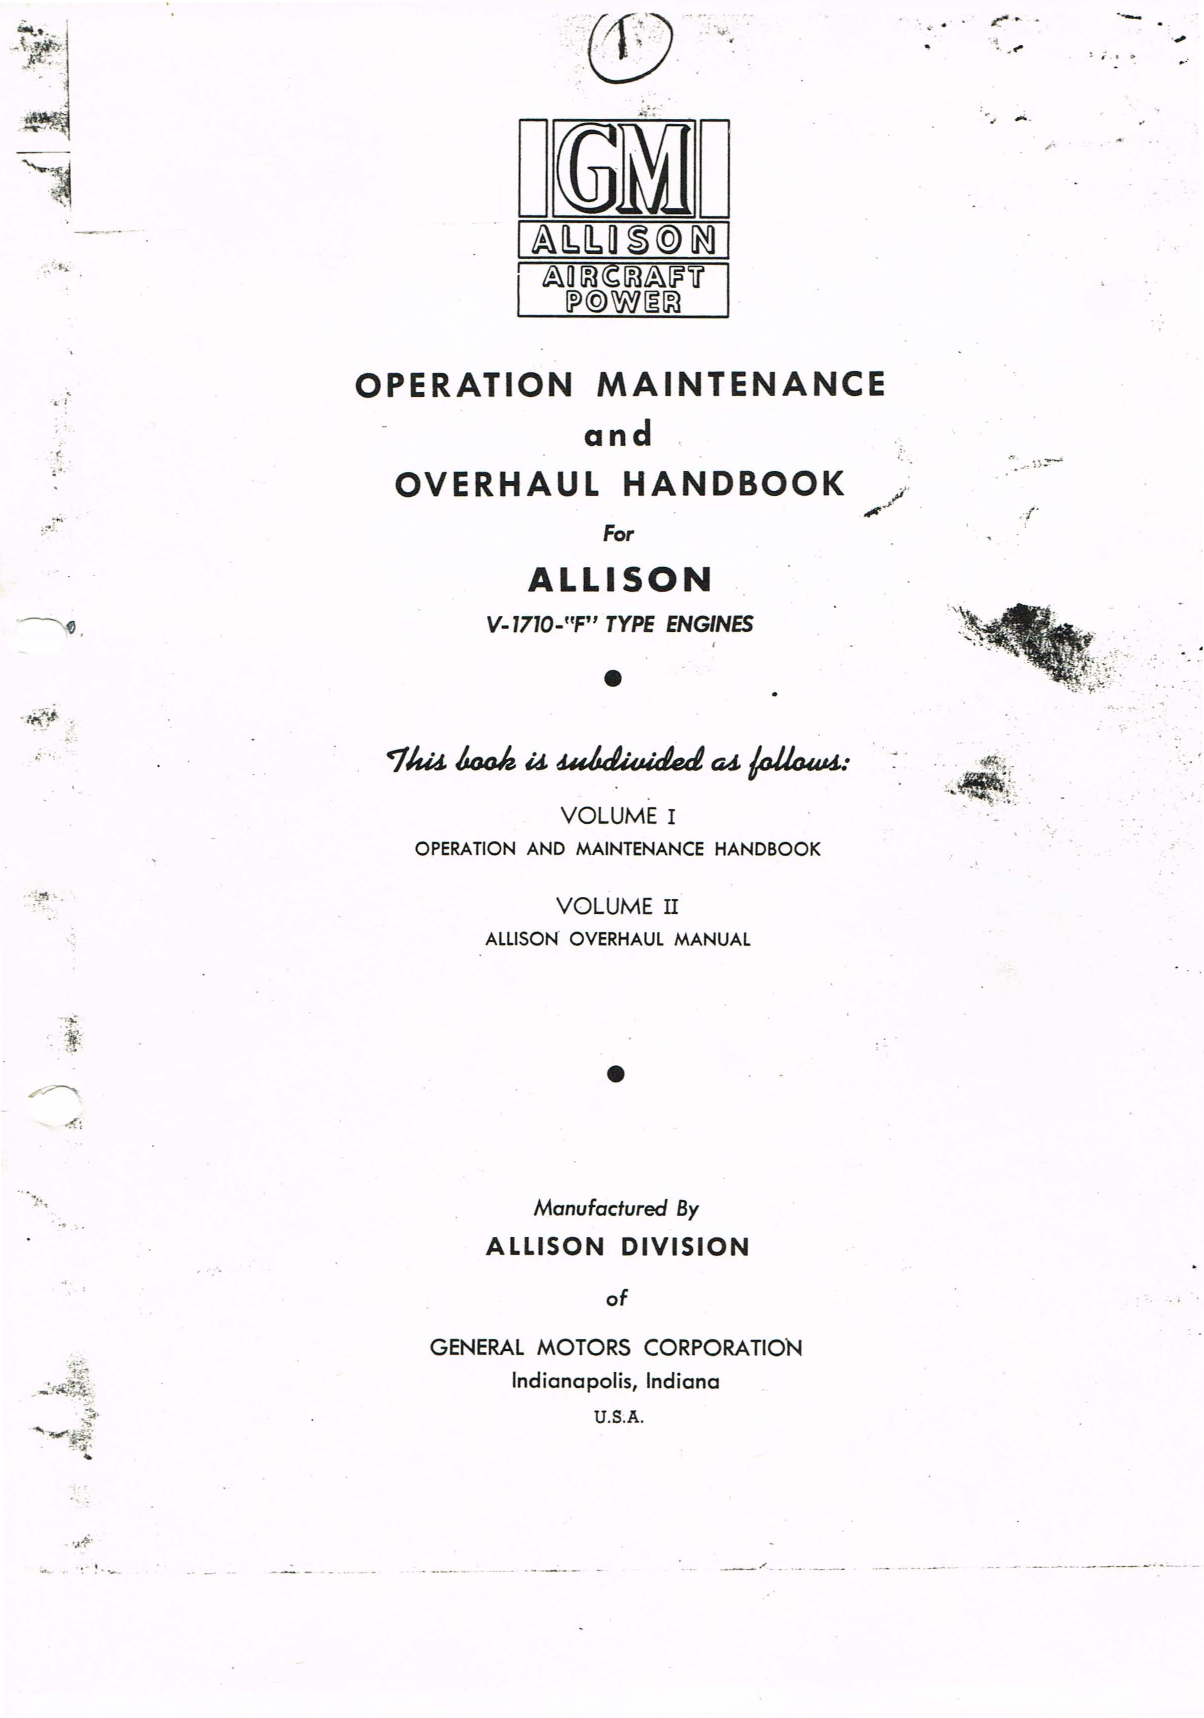 Sample page 1 from AirCorps Library document: Operation, Maintenance and Overhaul for Allison V-1710-F Engines